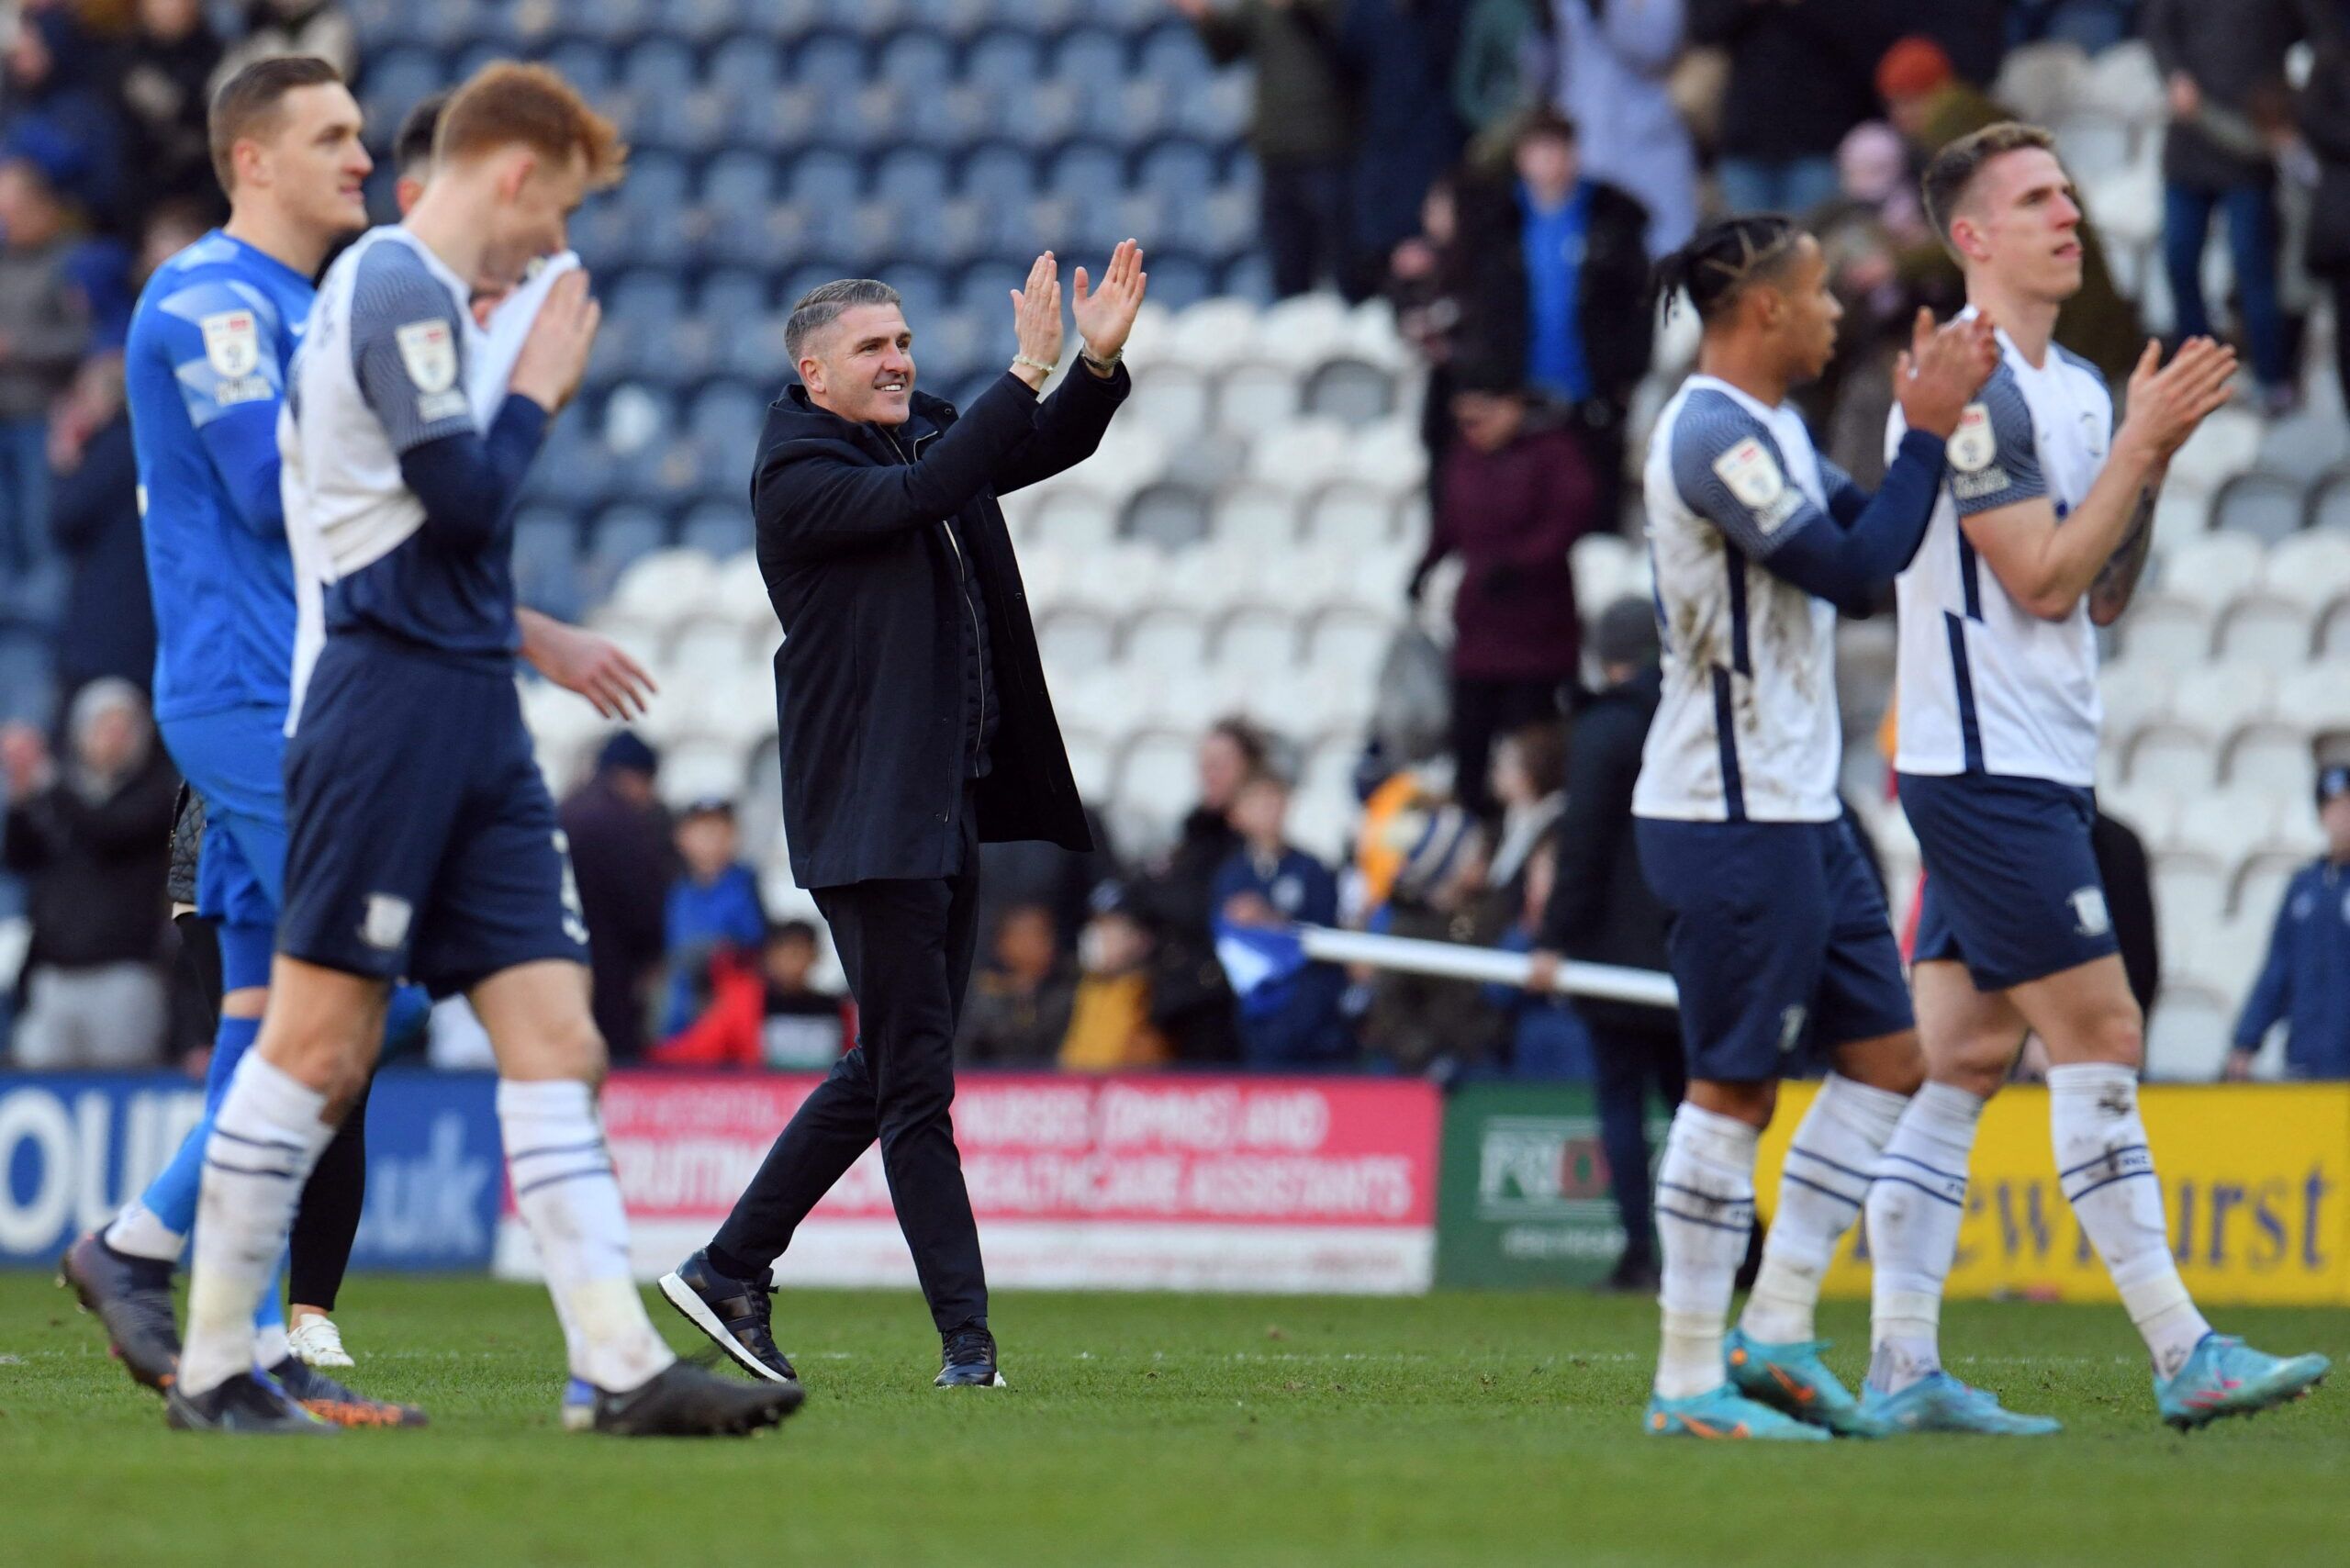 Soccer Football - Championship - Preston North End v AFC Bournemouth - Deepdale, Preston, Britain - March 5, 2022  Preston North End manager Ryan Lowe celebrates at full time  Action Images/Paul Burrows  EDITORIAL USE ONLY. No use with unauthorized audio, video, data, fixture lists, club/league logos or 